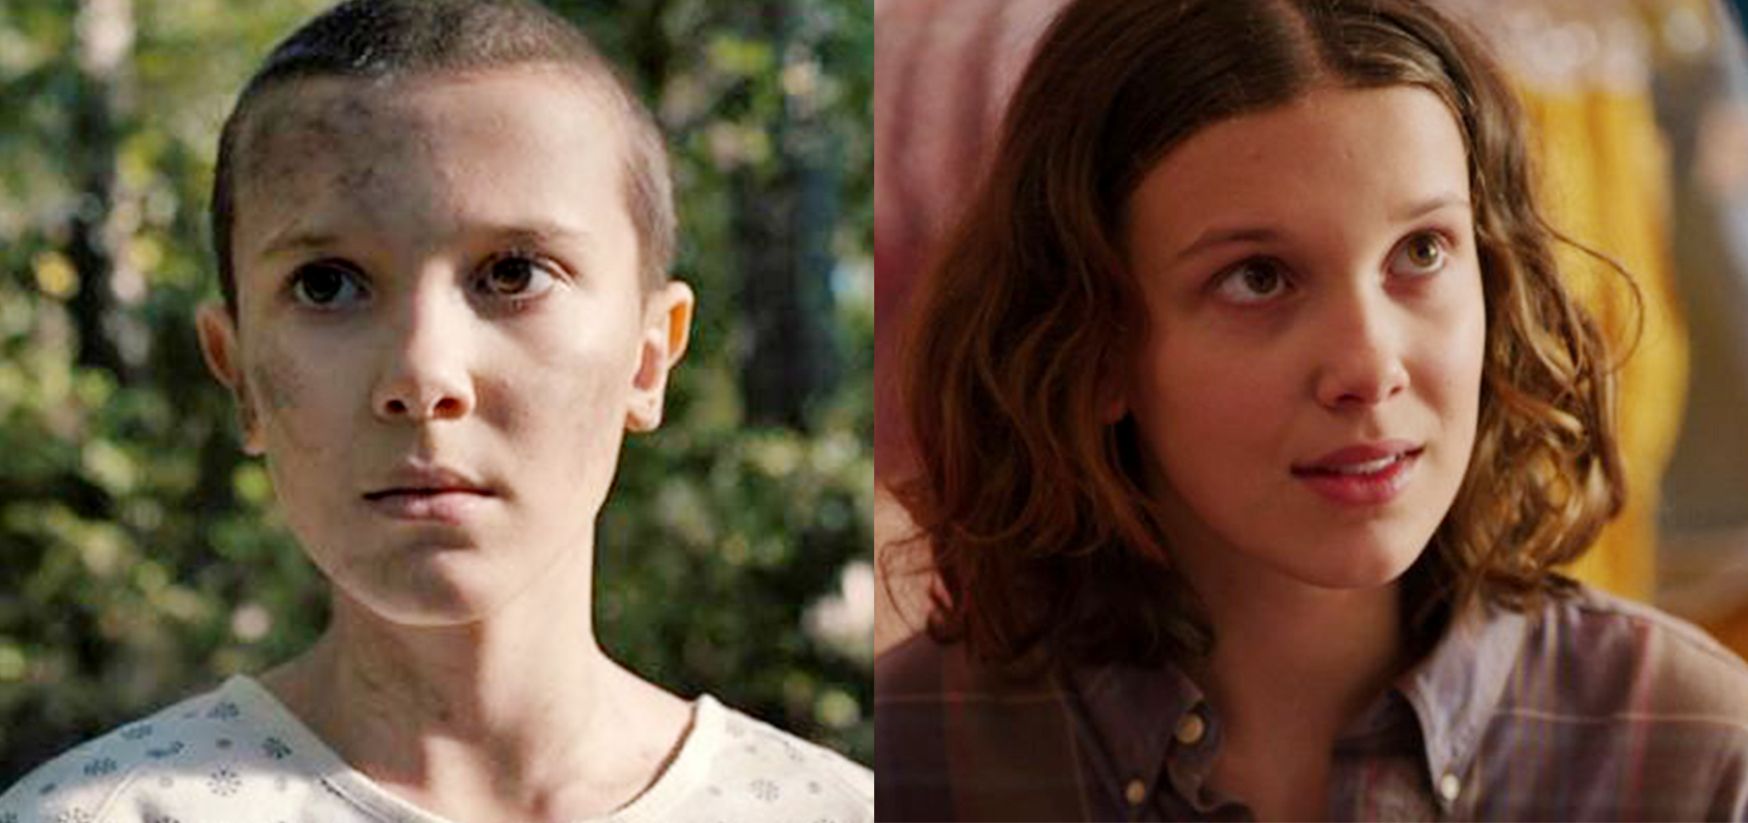 eleven stranger things actress